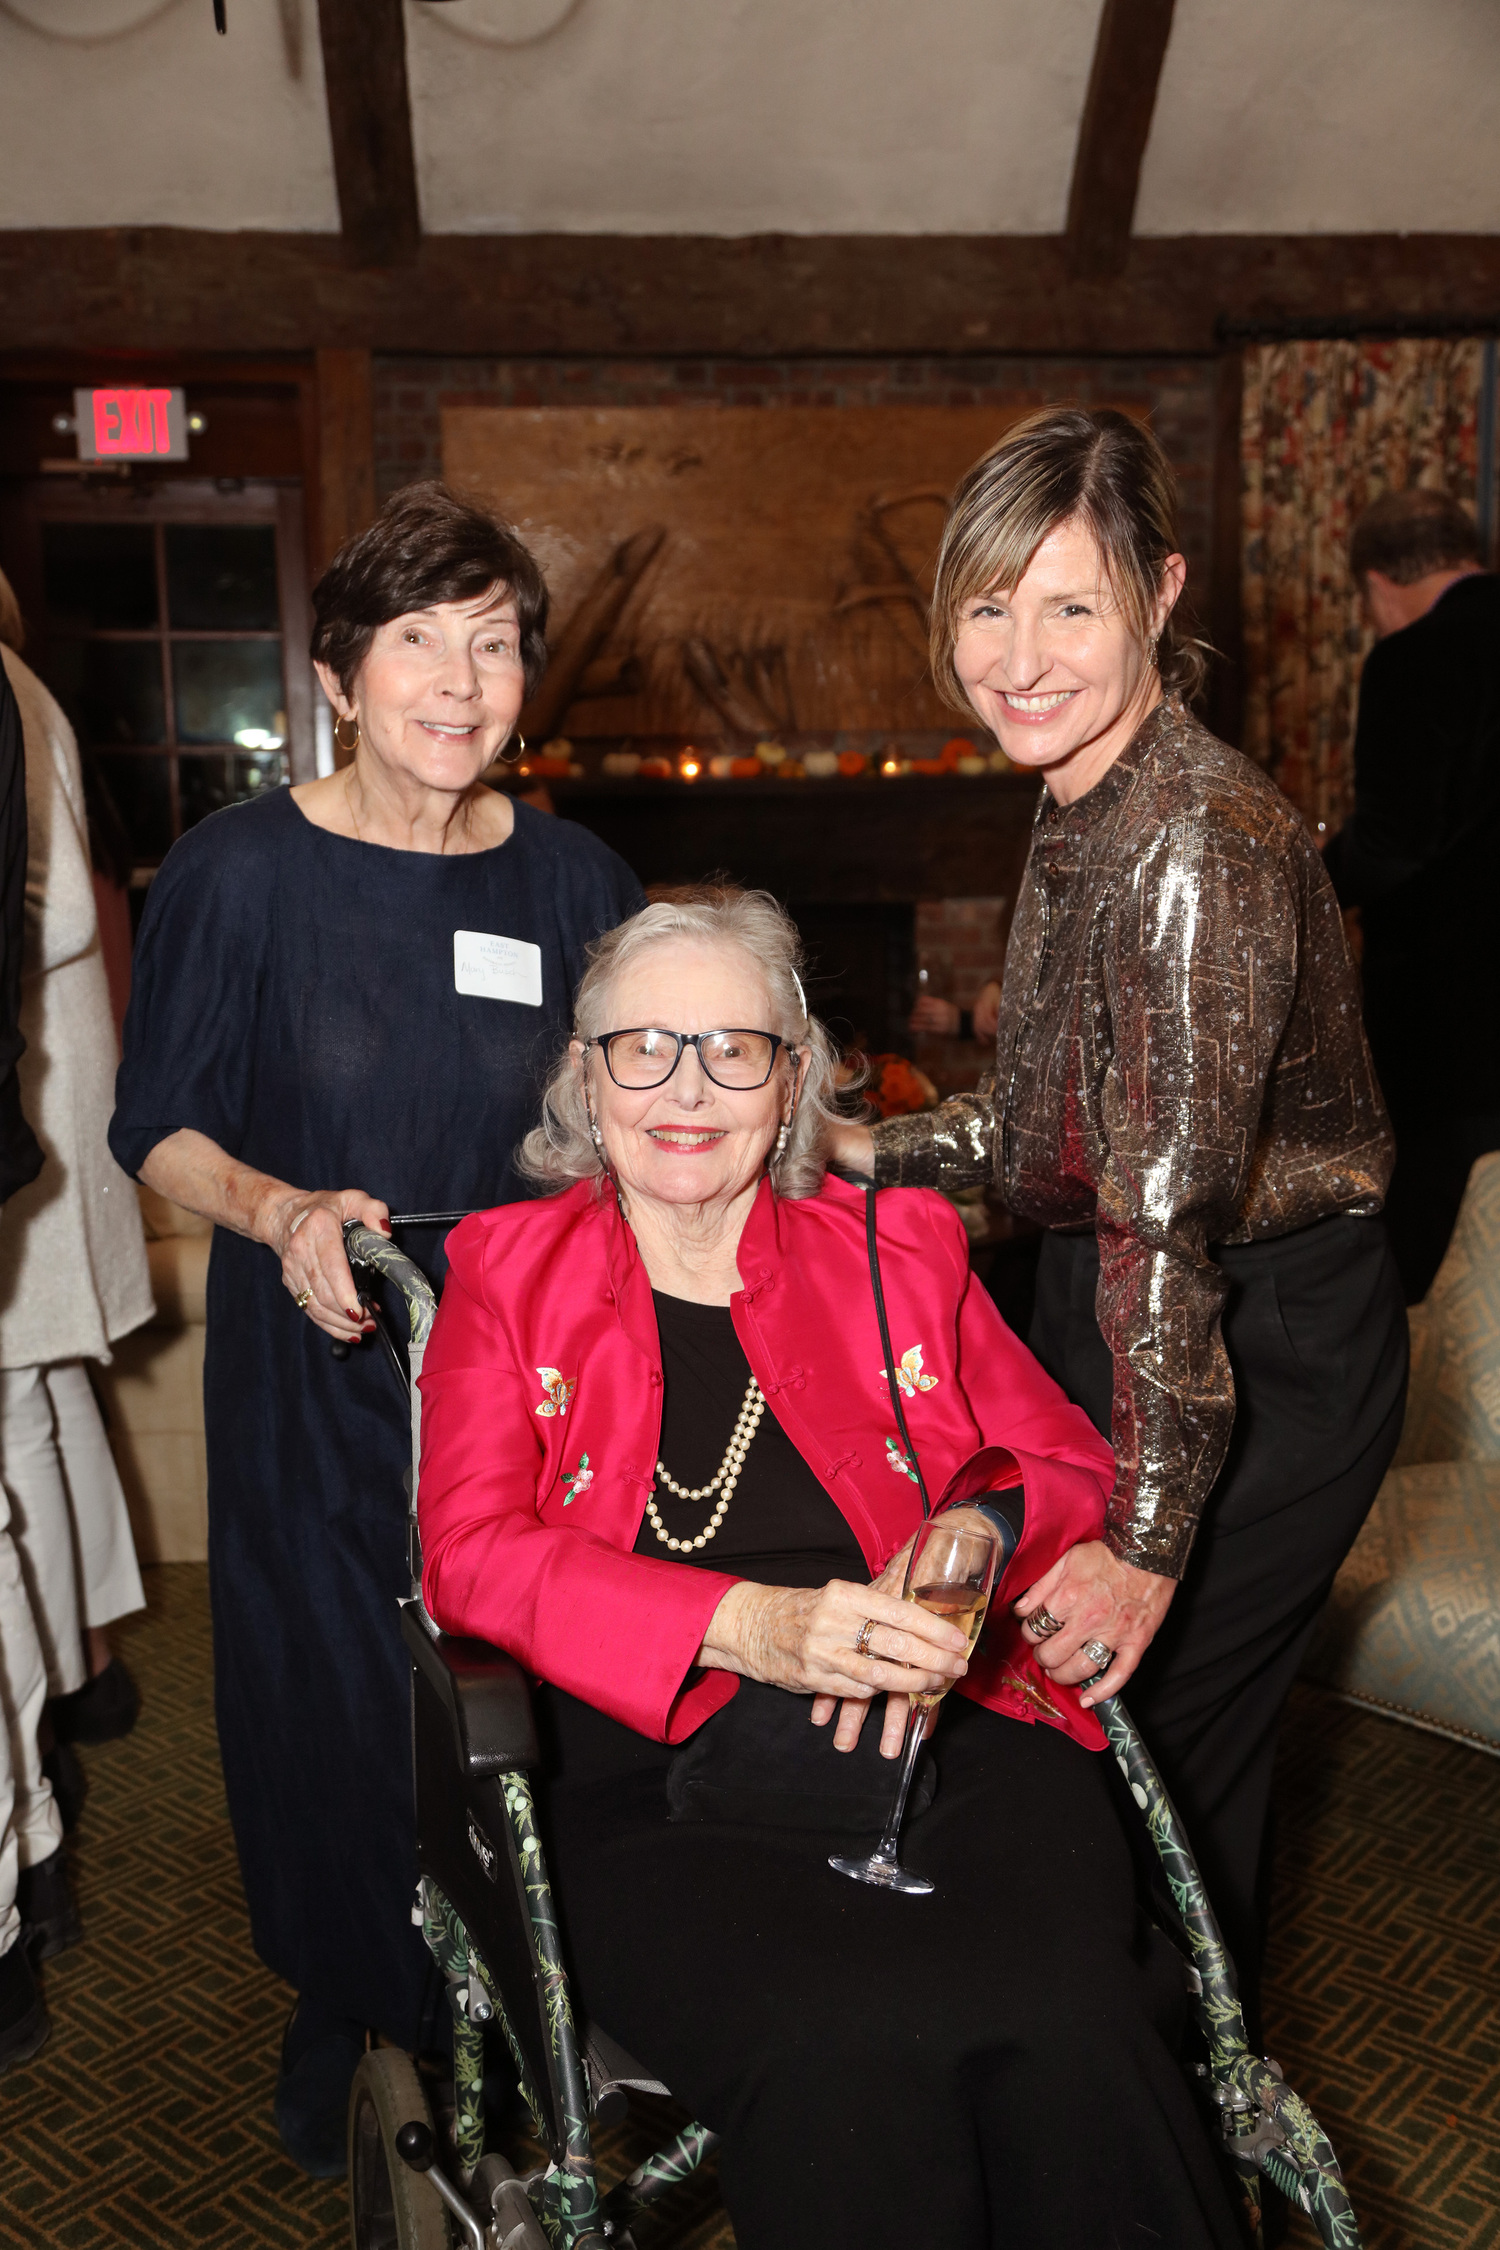 Mary Busch, Mardie Gorman, Coraline Gorman at the Maidstone for the East Hampton House & Garden Tour kick-off cocktail party on Friday. ROSSA COLE